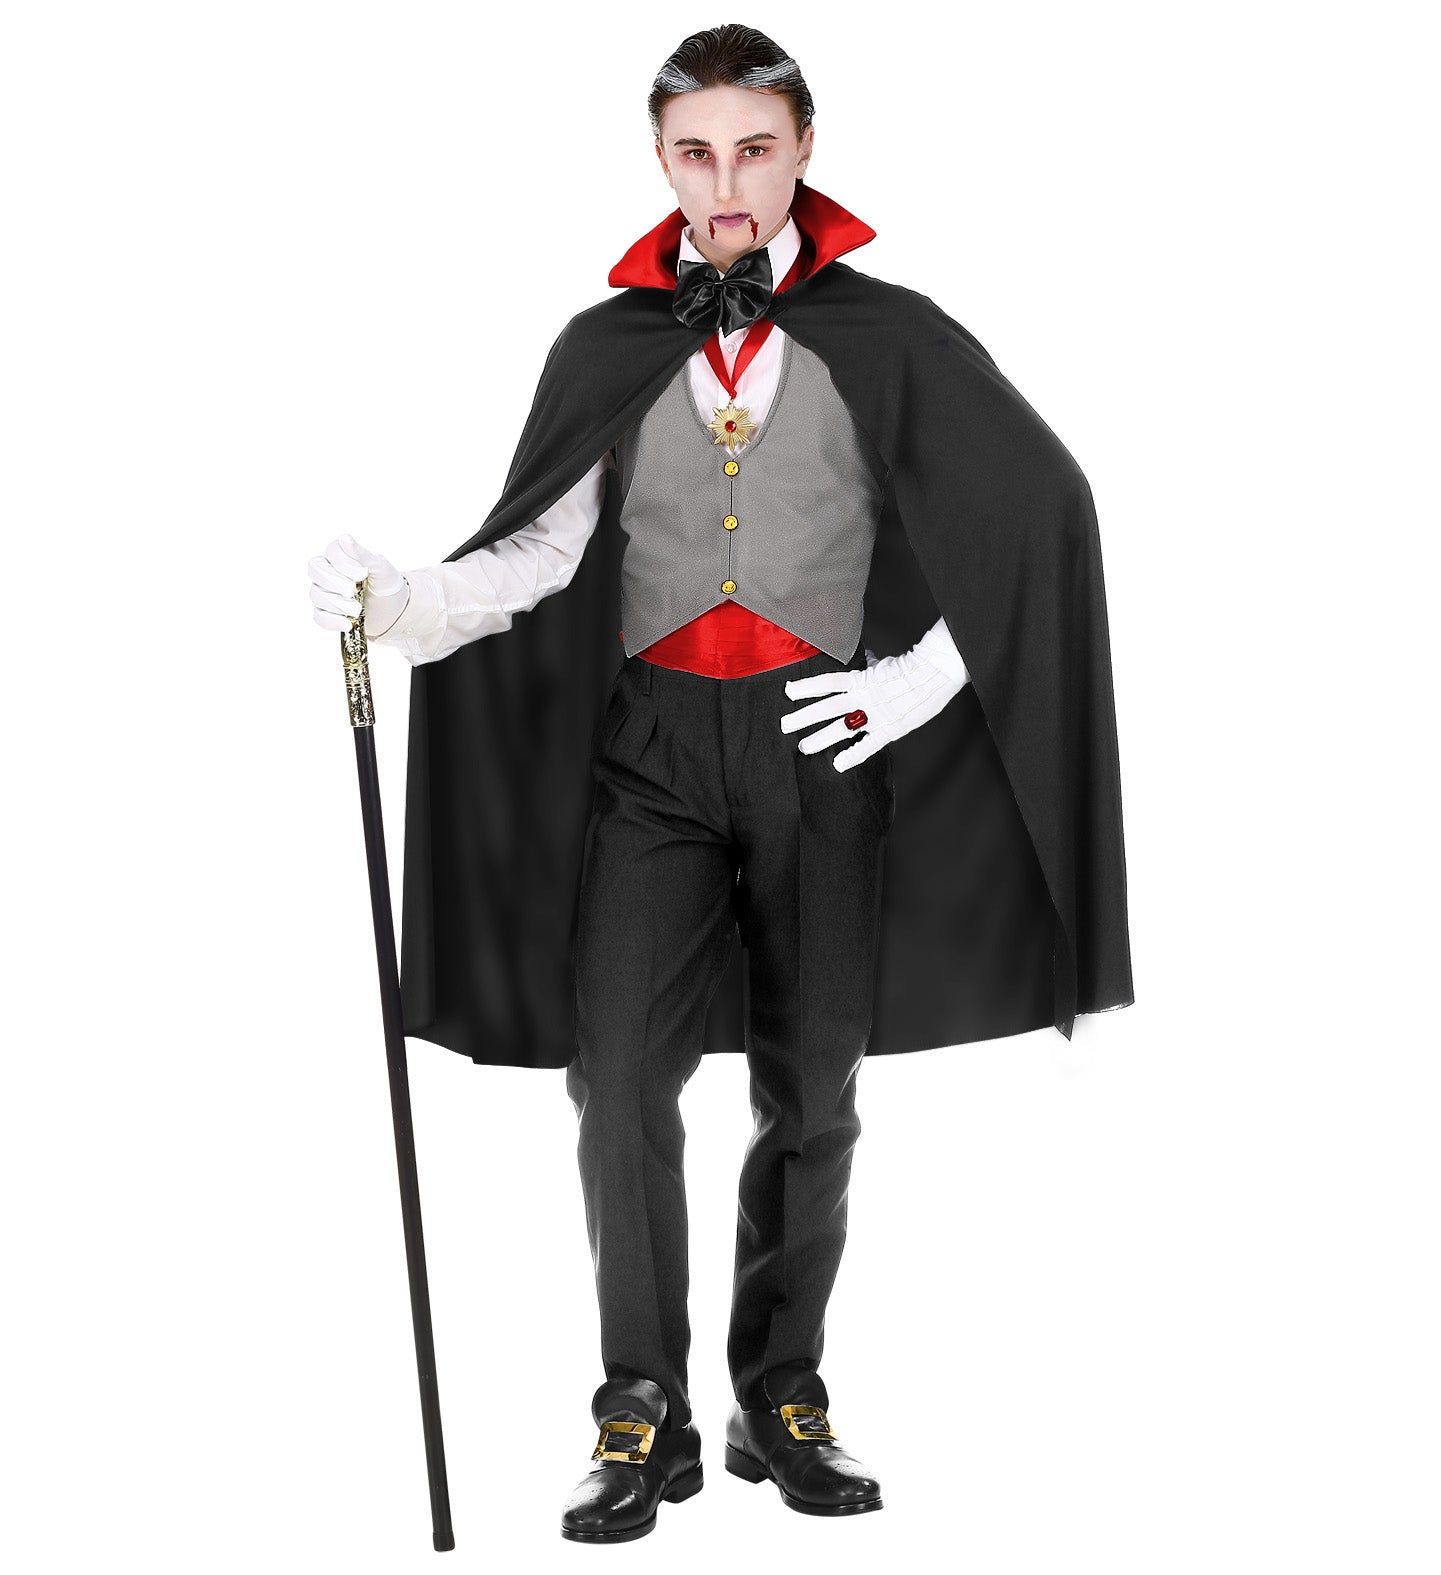  Morph - Gothic Vampire Costume Men Adult - Mens Vampire Costume  - Vampire Costume Male - Vampire Costume Men Cape - Adult Male Vampire  Costume - Halloween Vampire Costume - Size L : Clothing, Shoes & Jewelry